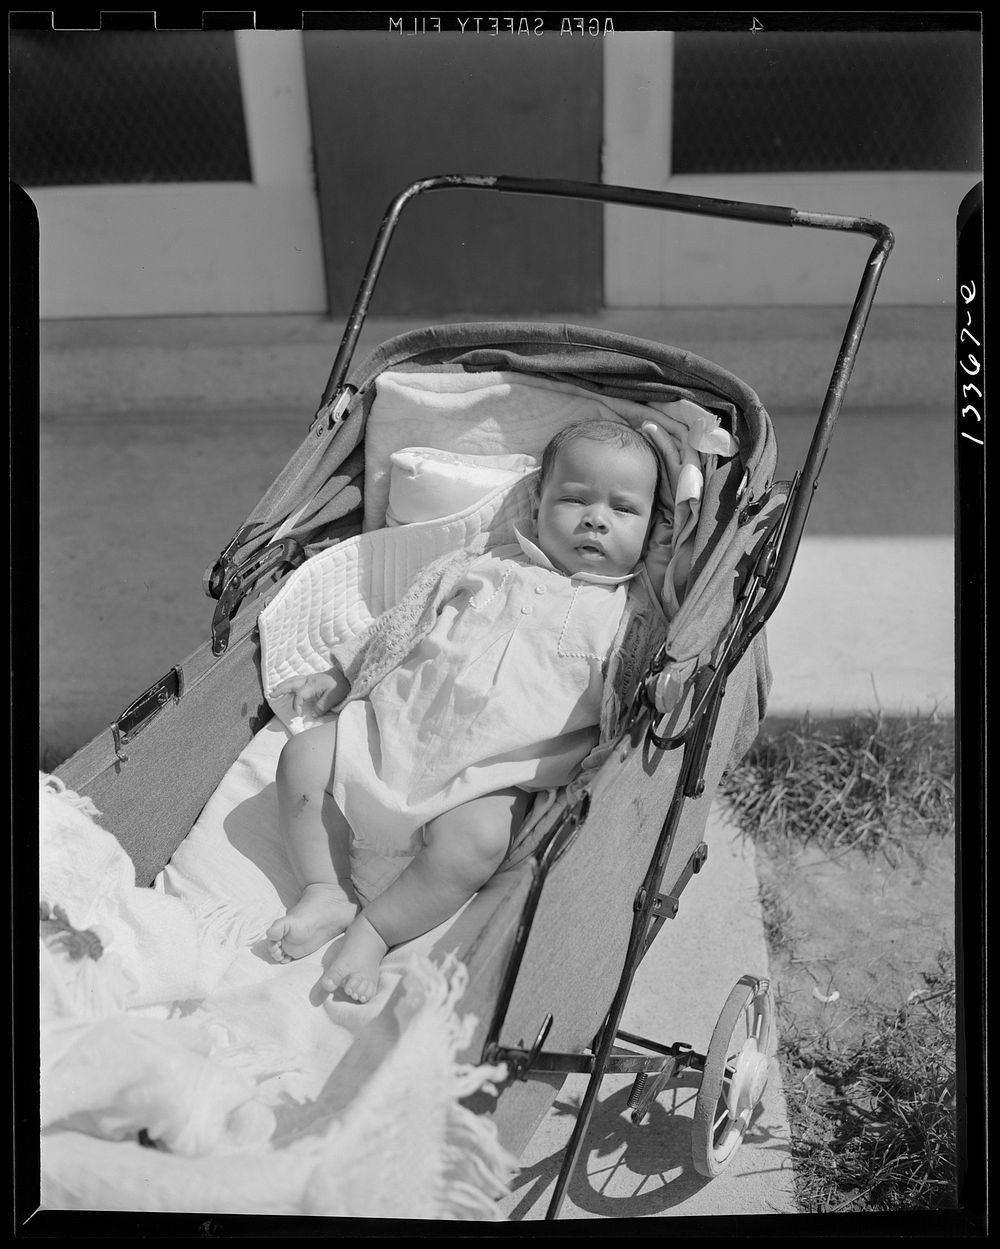 Anacostia, D.C. Frederick Douglass housing project. Baby taking a sun bath. Sourced from the Library of Congress.